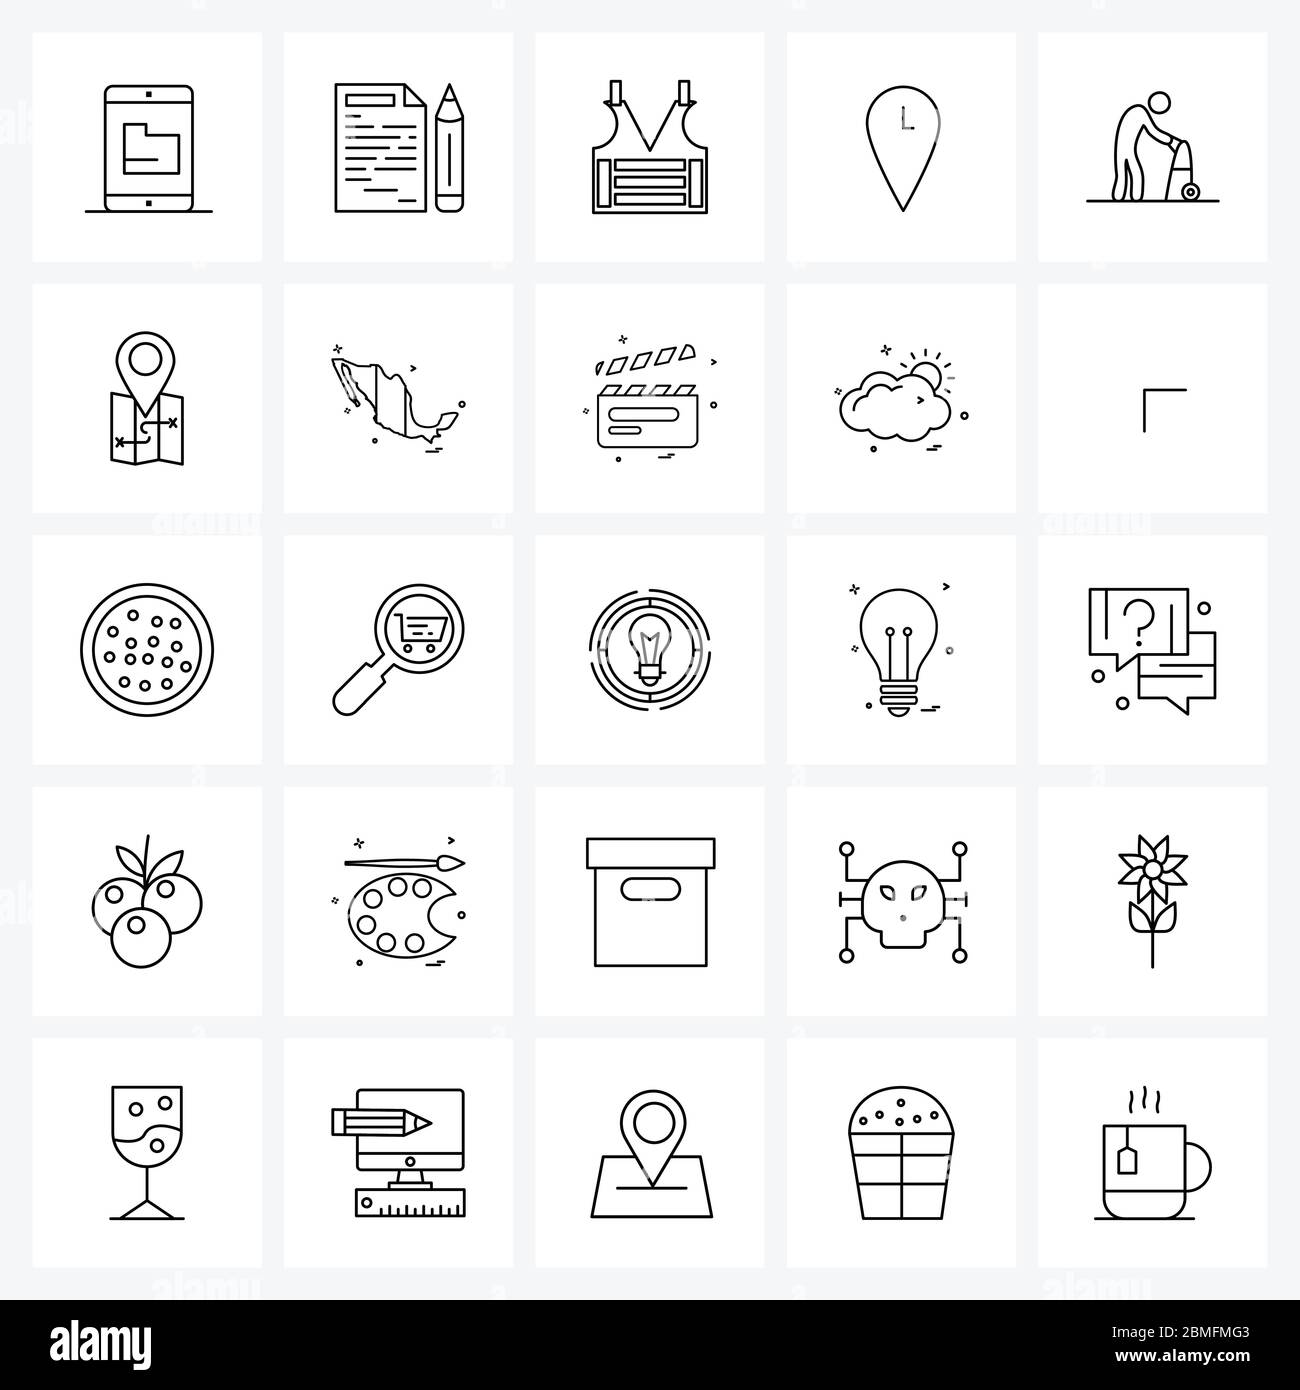 Set of 25 UI Icons and symbols for paralyzed, watch, sign, map, plate ...